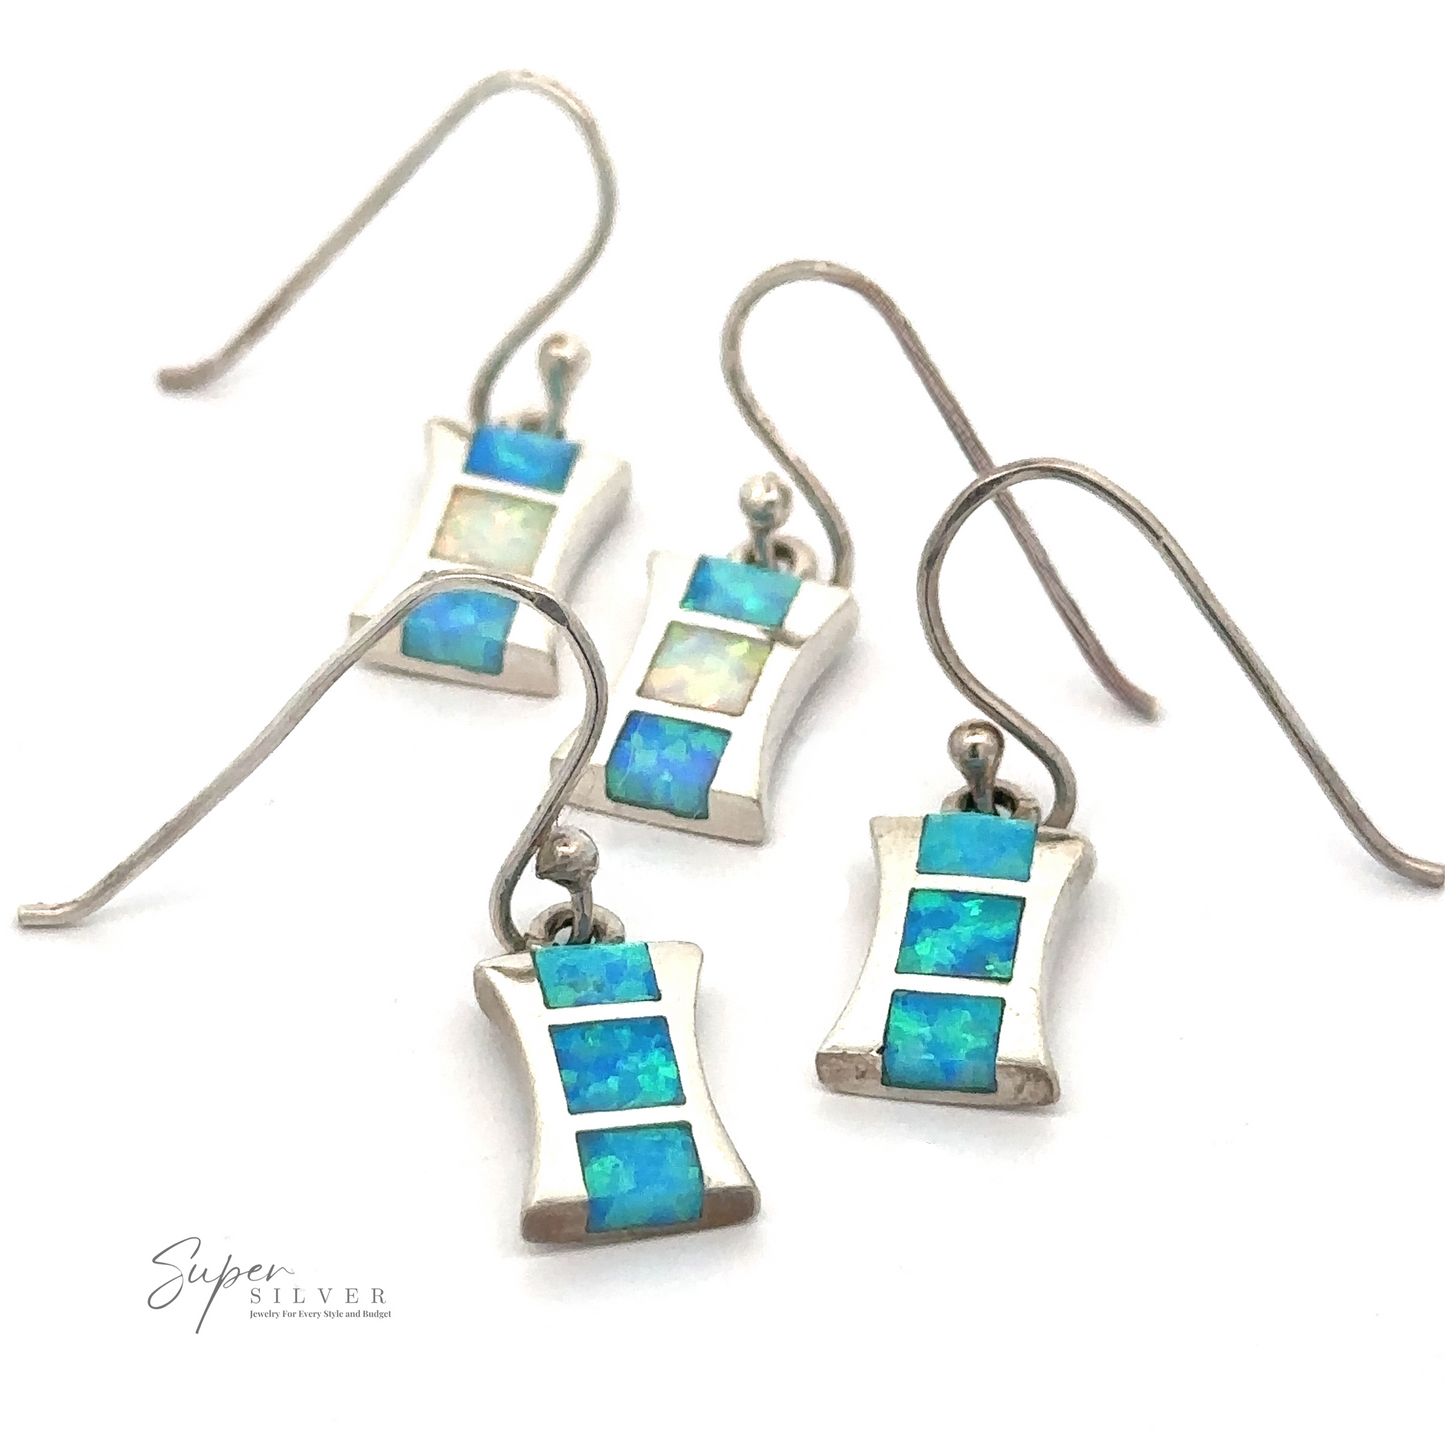 Four Freeform Lab-Created Opal Earrings are arranged in a scattered fashion on a white background. The logo "Super Silver" is visible in the bottom left corner.